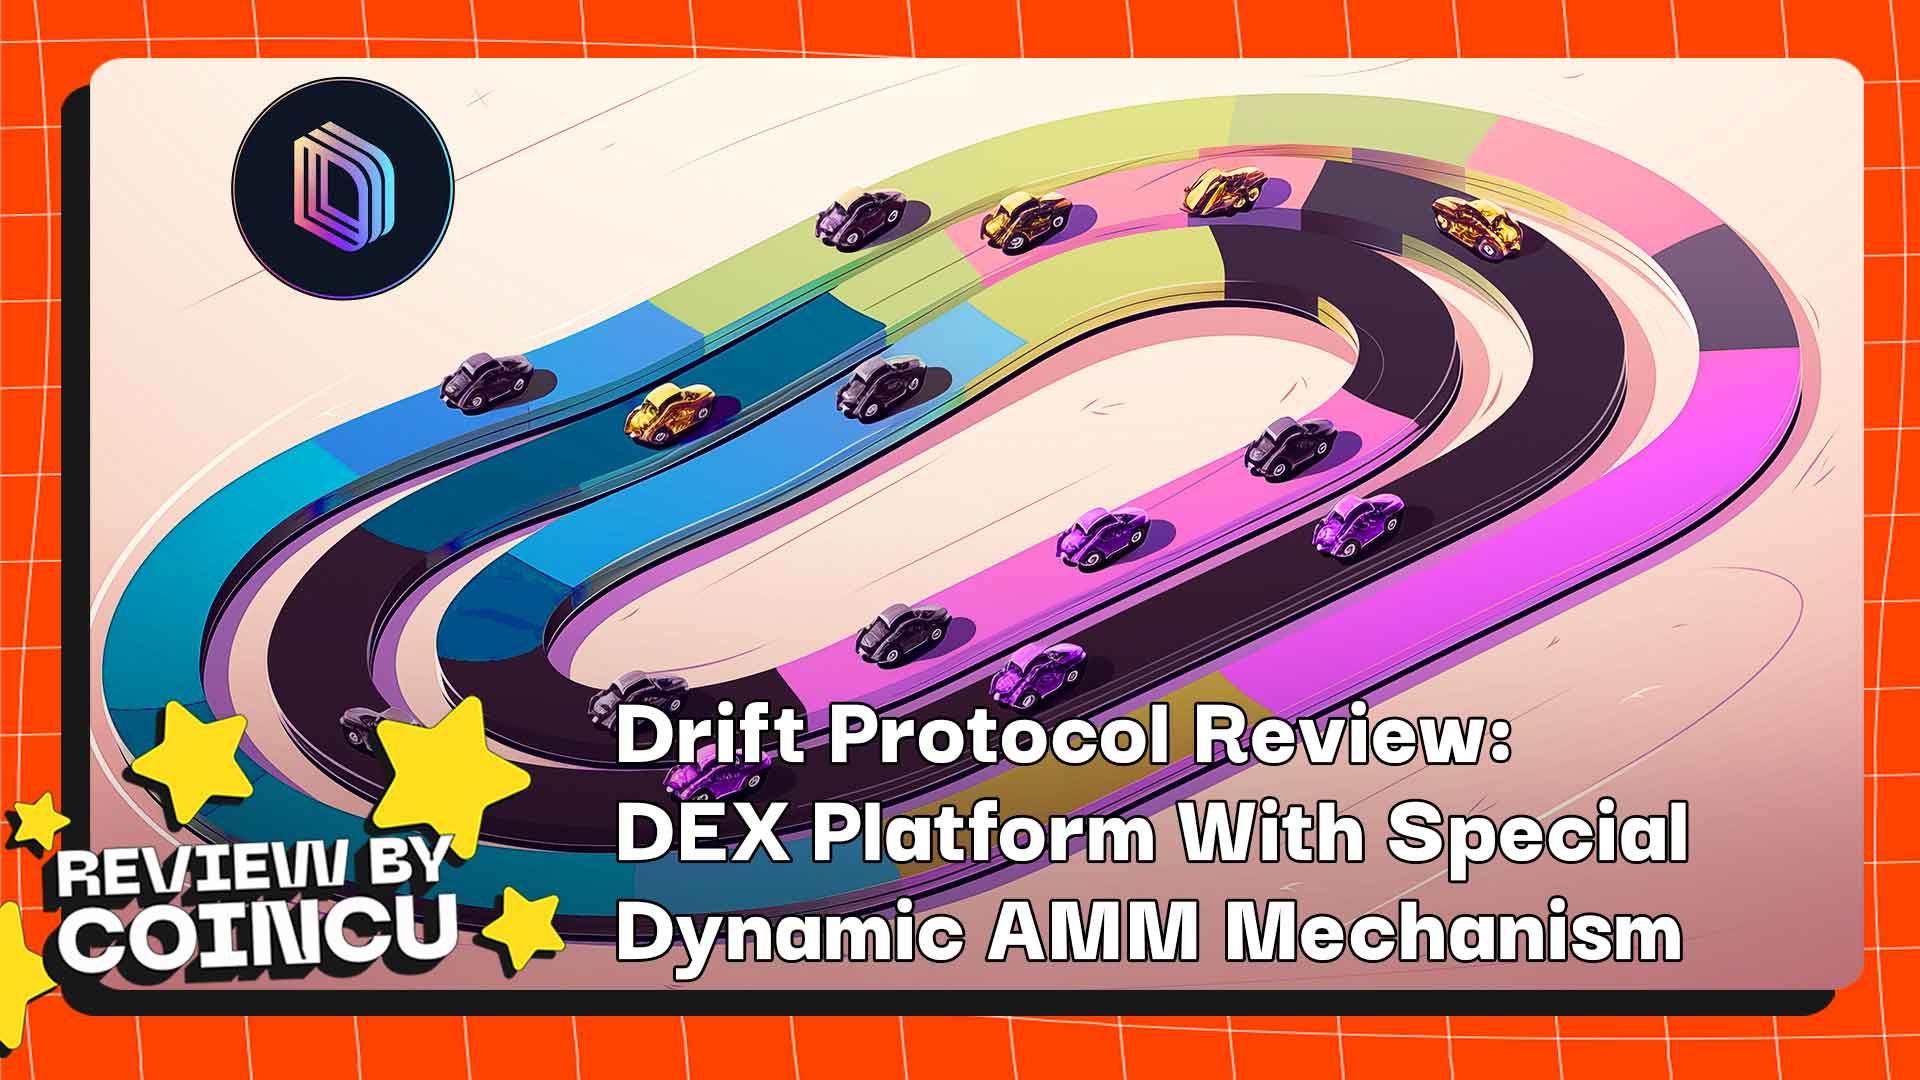 Drift Protocol Review: DEX Platform With Special Dynamic AMM Mechanism